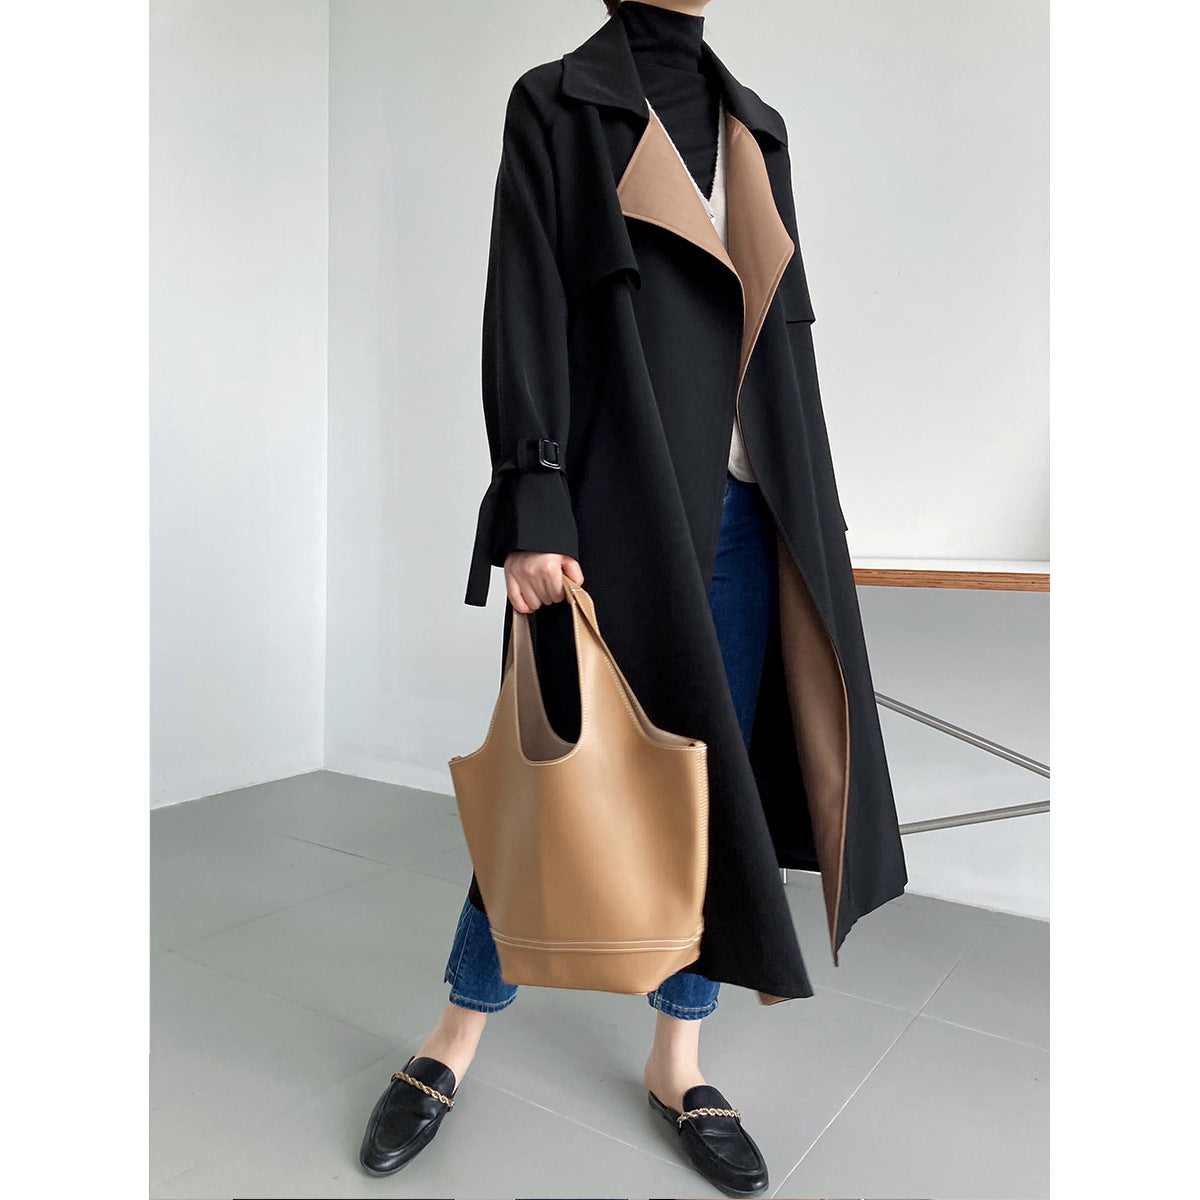 Elegant Stitching Contrast Color Trench Coat Women Mid-Length over-the-Knee Large Collared Waist-Controlled Overcoat